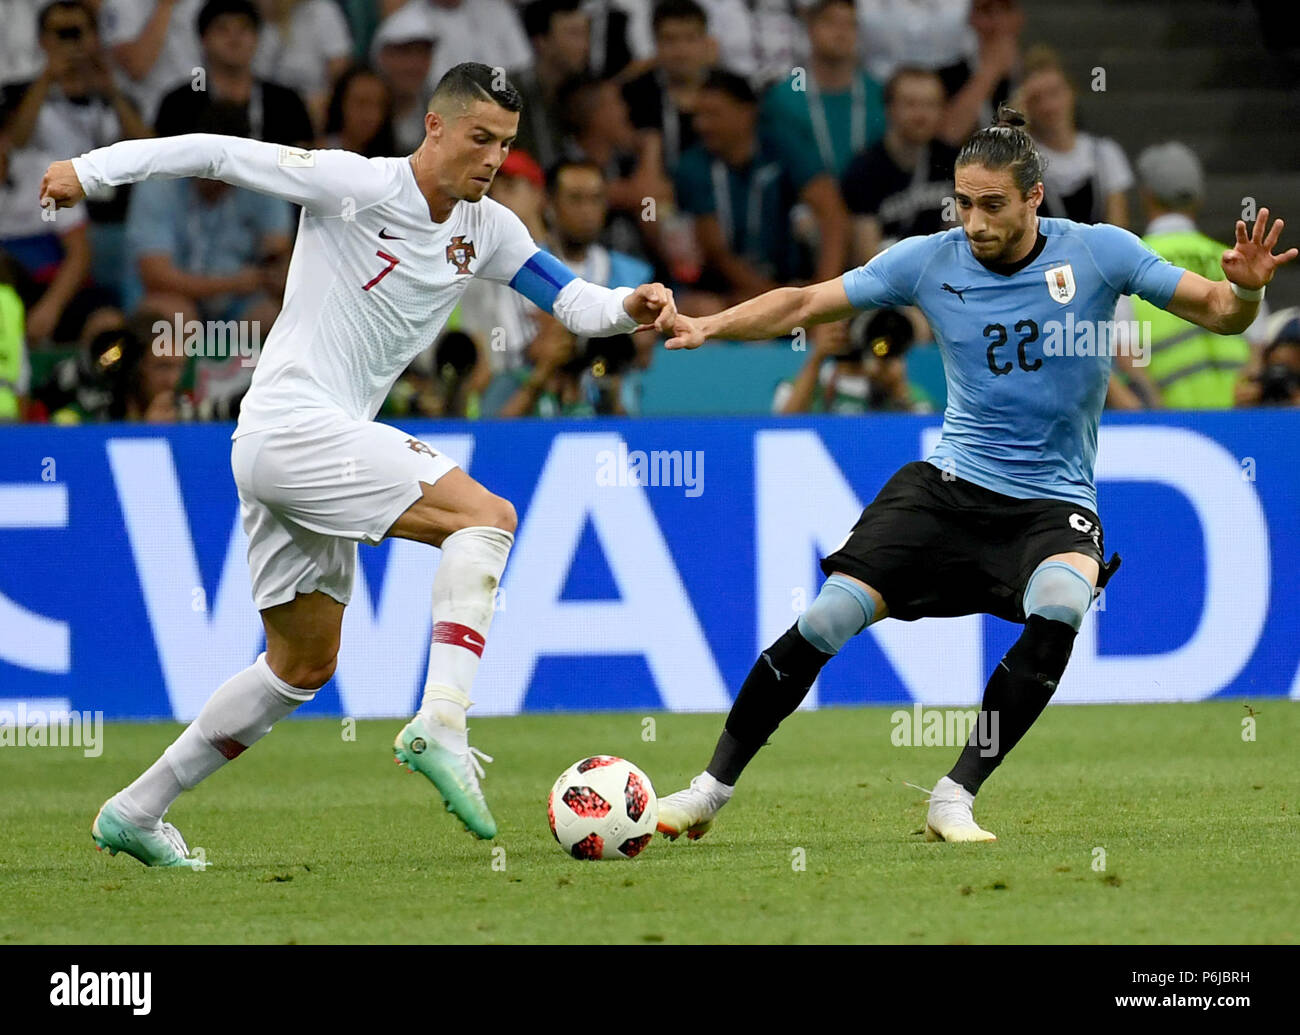 Sochi, Russia. 30th June, 2018. Cristiano Ronaldo (L) of Portugal vies with Martin Caceres of Uruguay during the 2018 FIFA World Cup round of 16 match between Uruguay and Portugal in Sochi, Russia, on June 30, 2018. Uruguay won 2-1 and advanced to the quarter-final. Credit: Chen Cheng/Xinhua/Alamy Live News Stock Photo